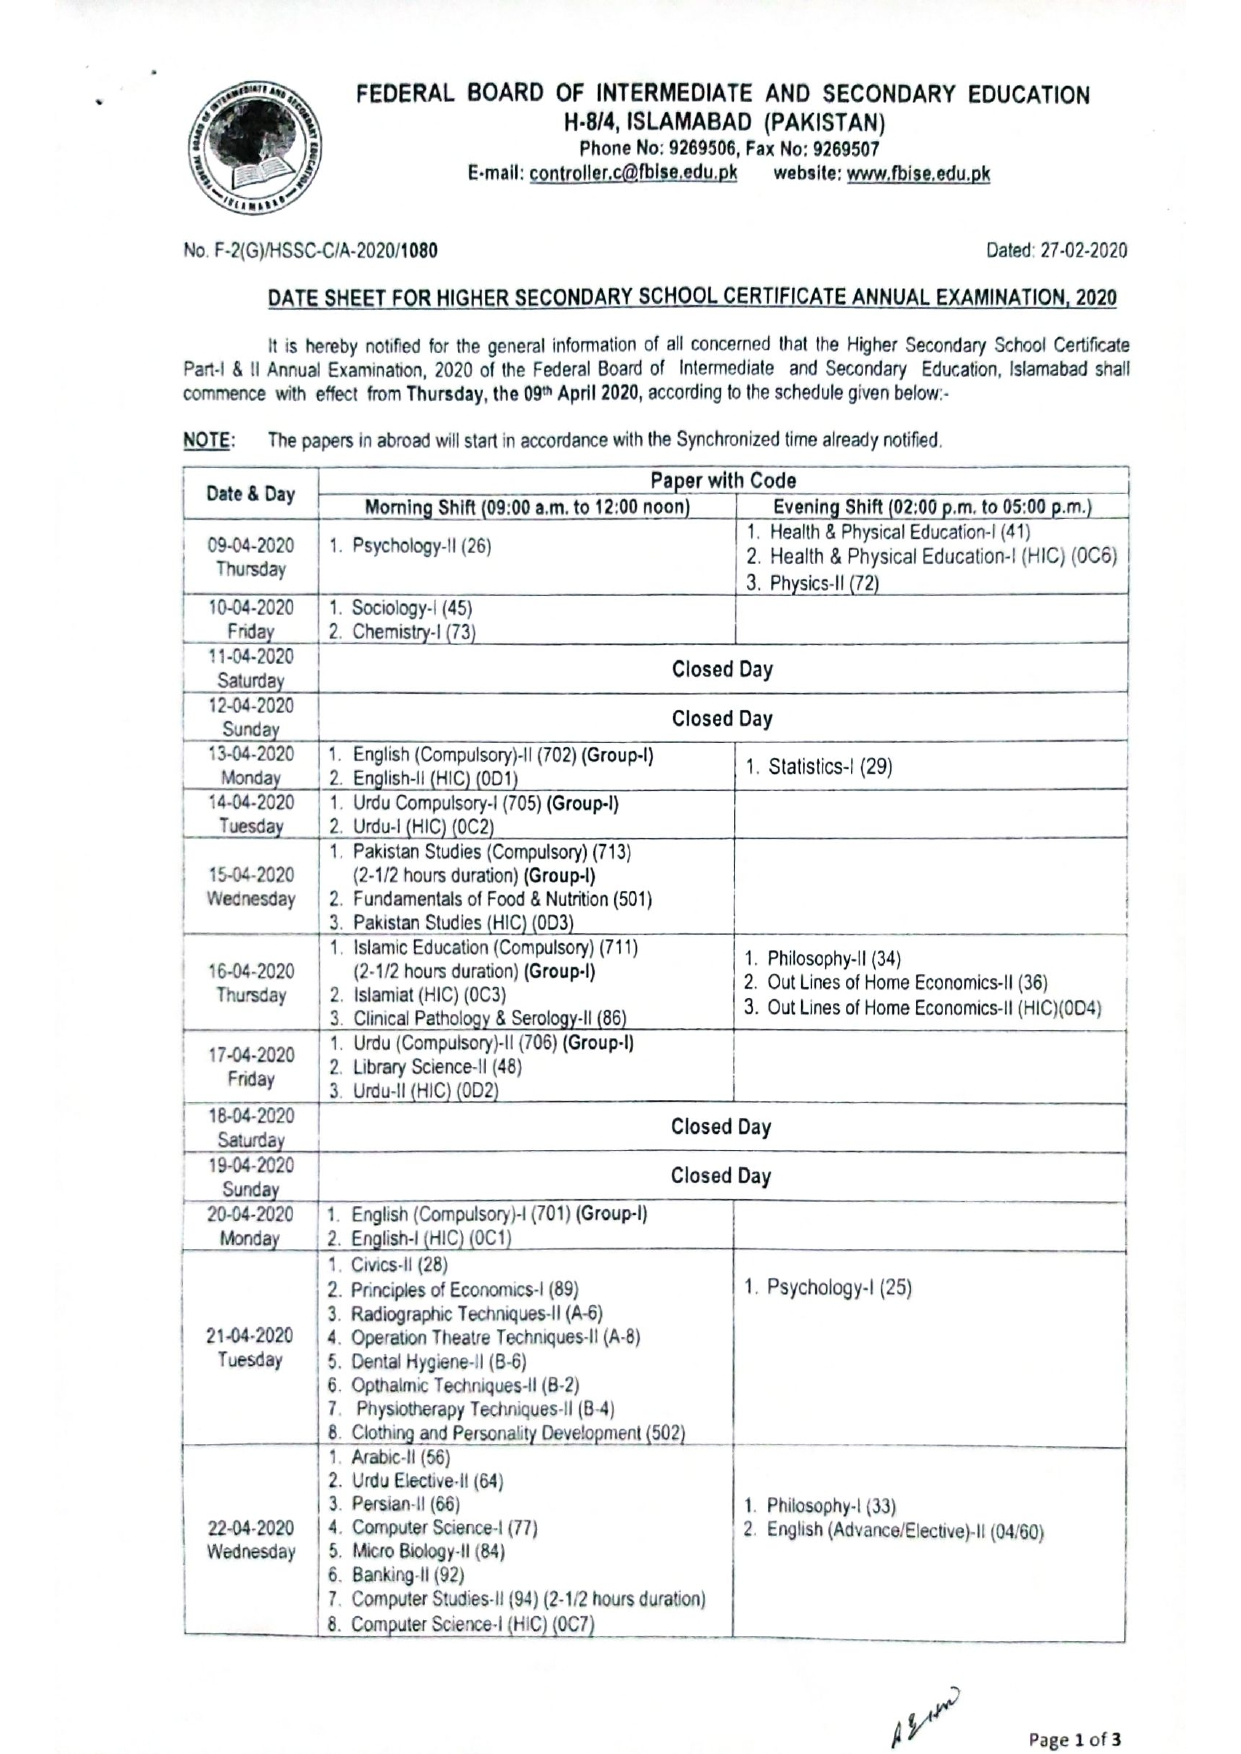 Date Sheet for FBISE HSSC Annual Examination 2020